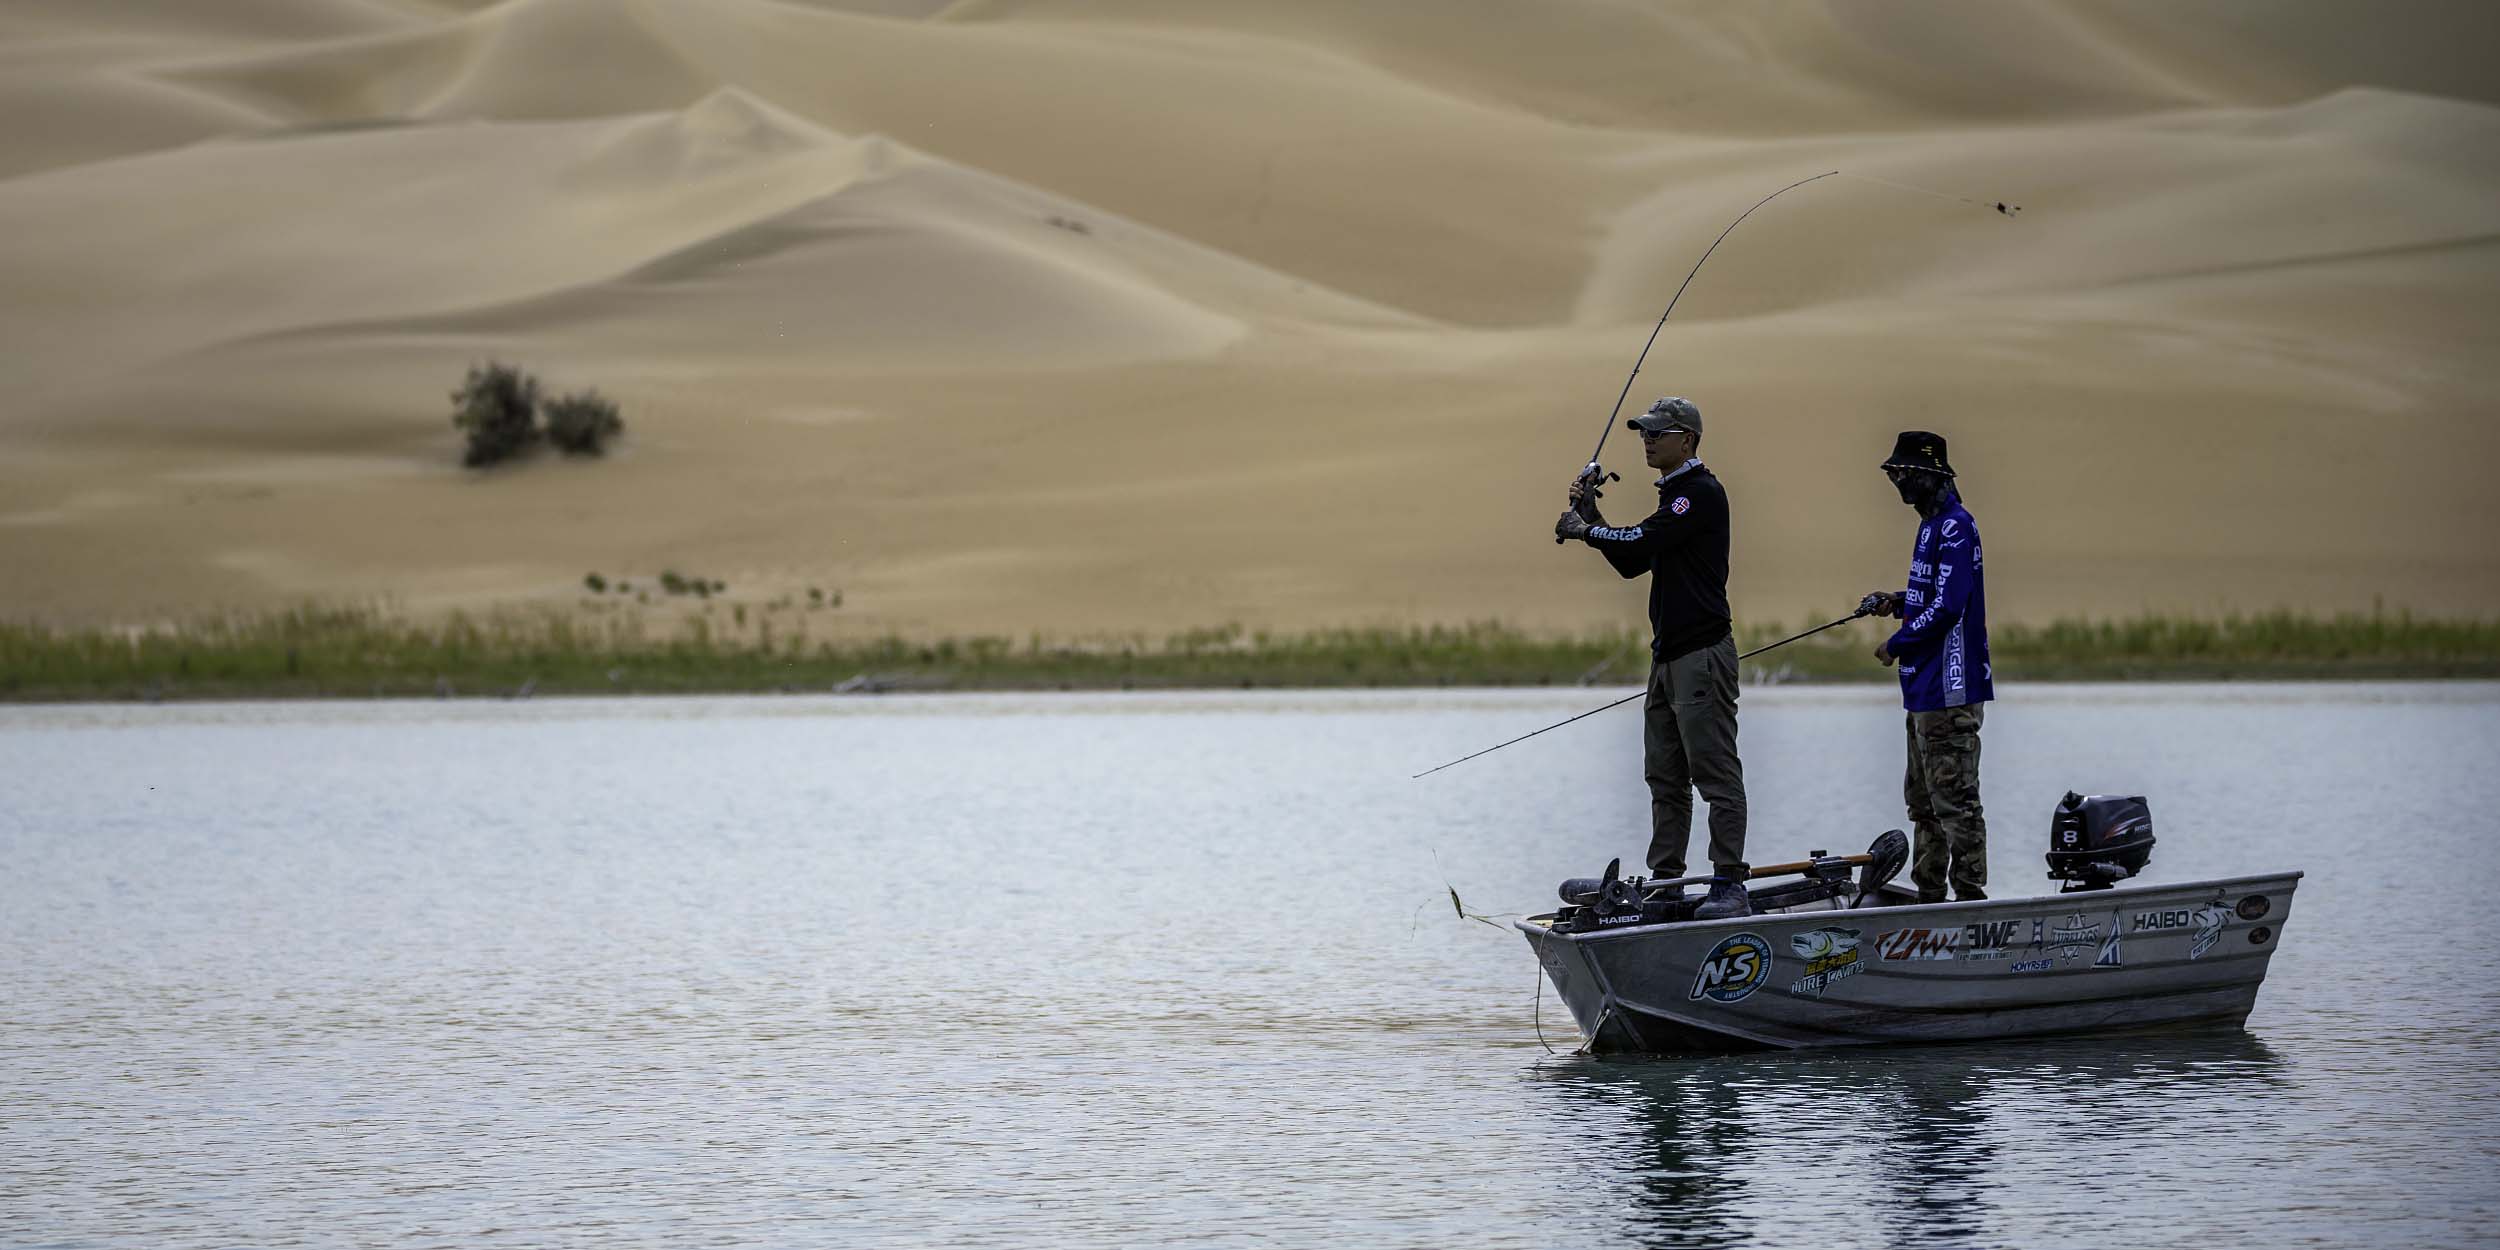 China's Youth Are Hooked on a New Outdoor Sport: Lure Fishing